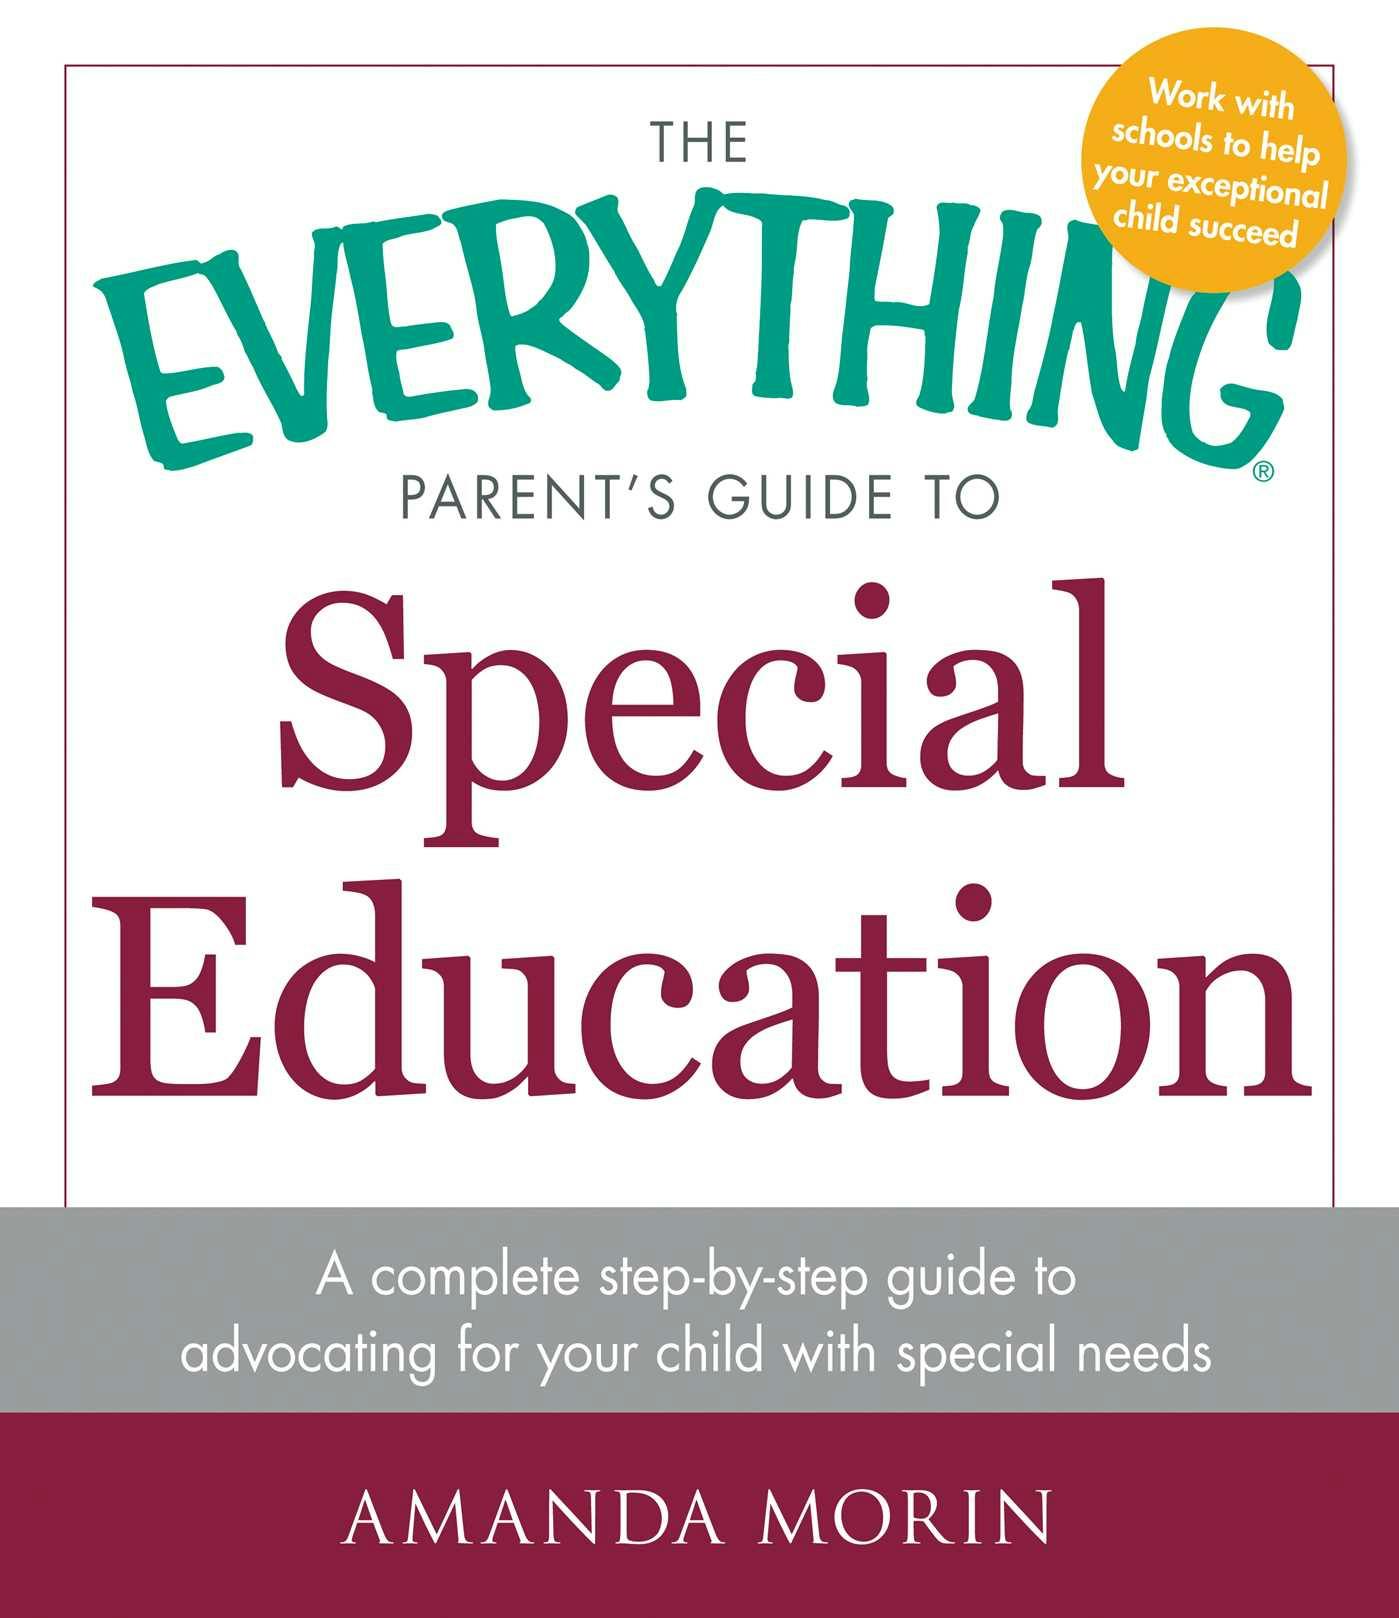 The Everything Parent's Guide to Special Education: A Complete Step-by-Step Guide to Advocating for Your Child with Special Needs - Amanda Morin